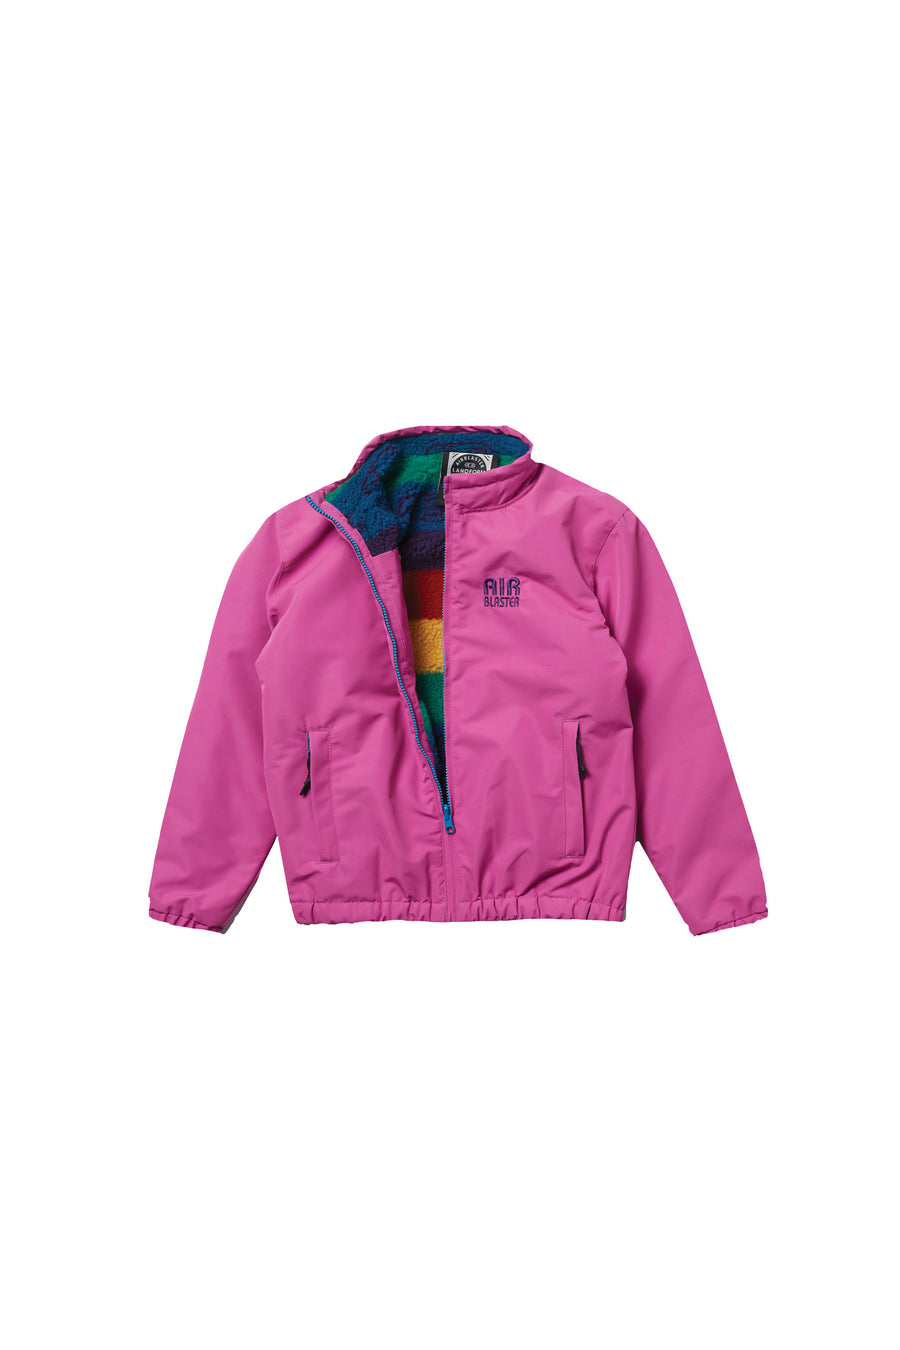 Airblaster Youth Double Puffling Jacket in Rainbow Stripe 2023